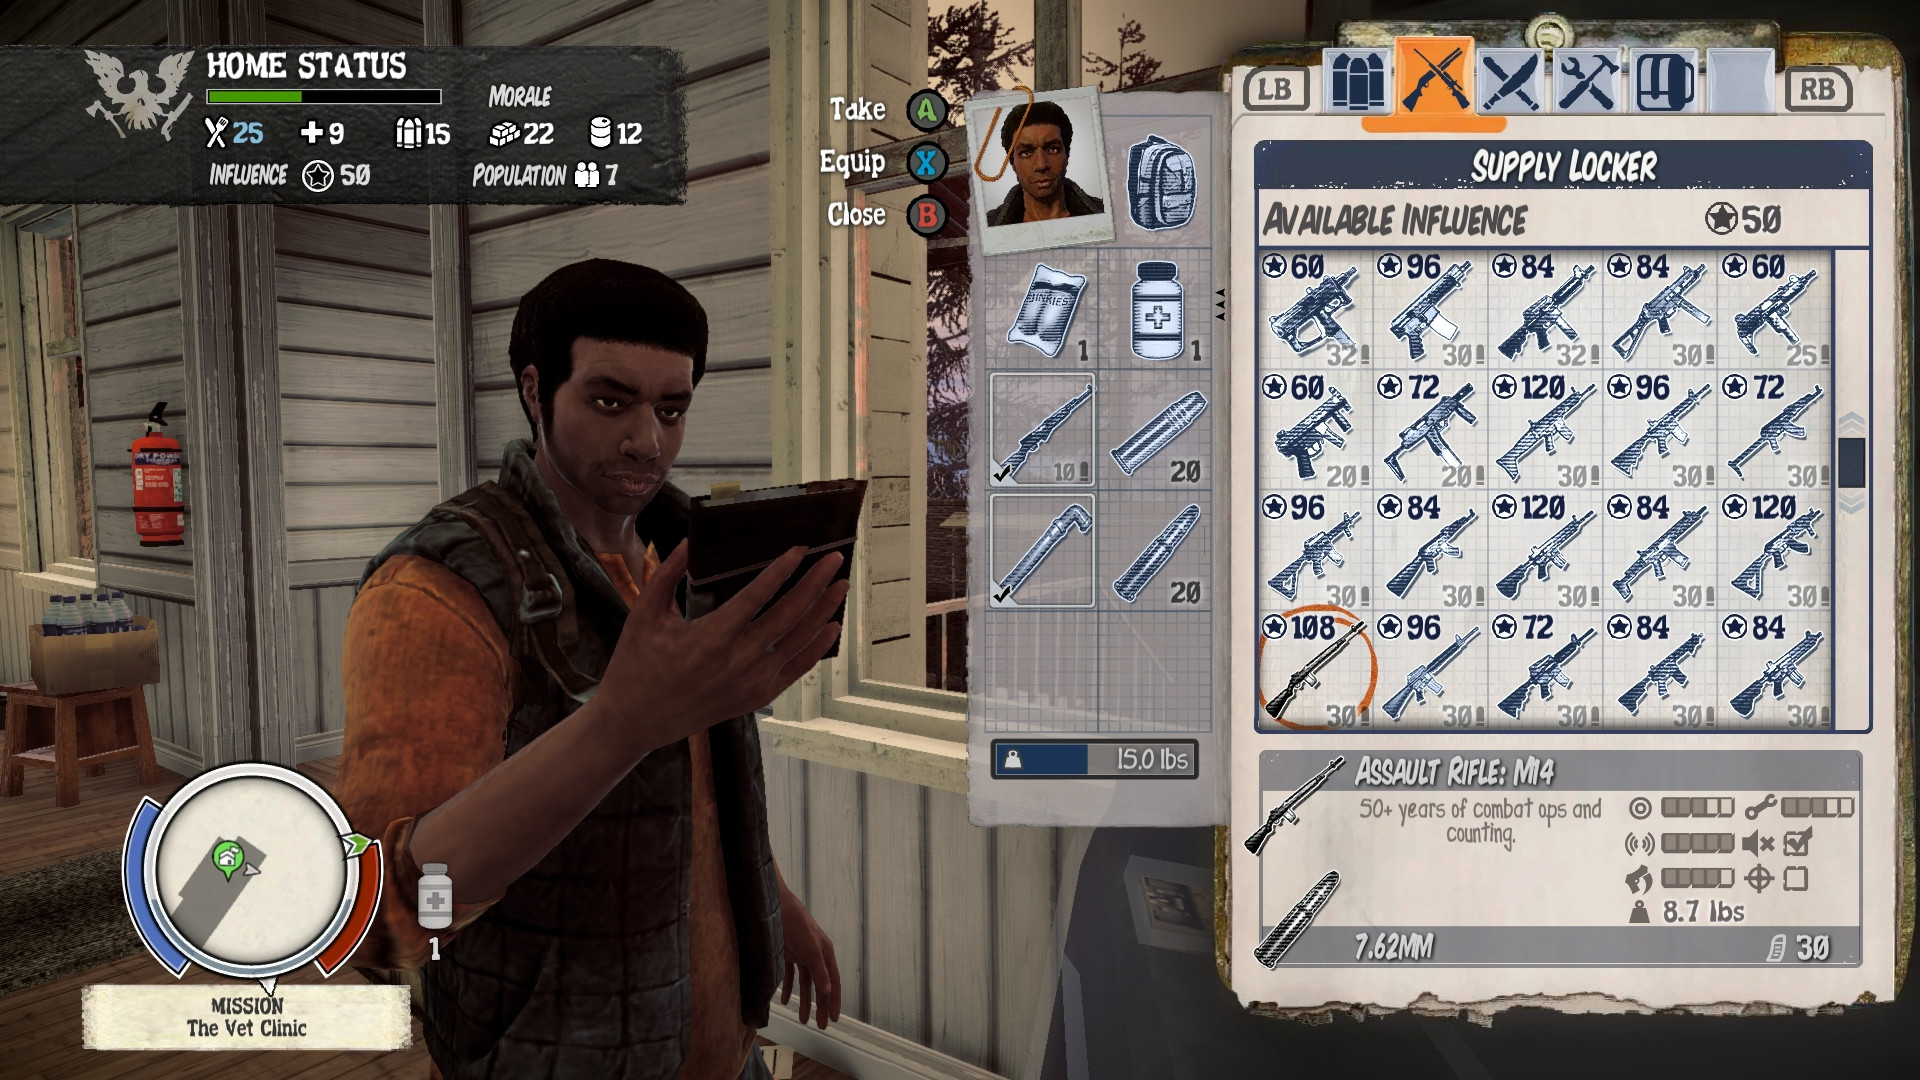 State of Decay, Software